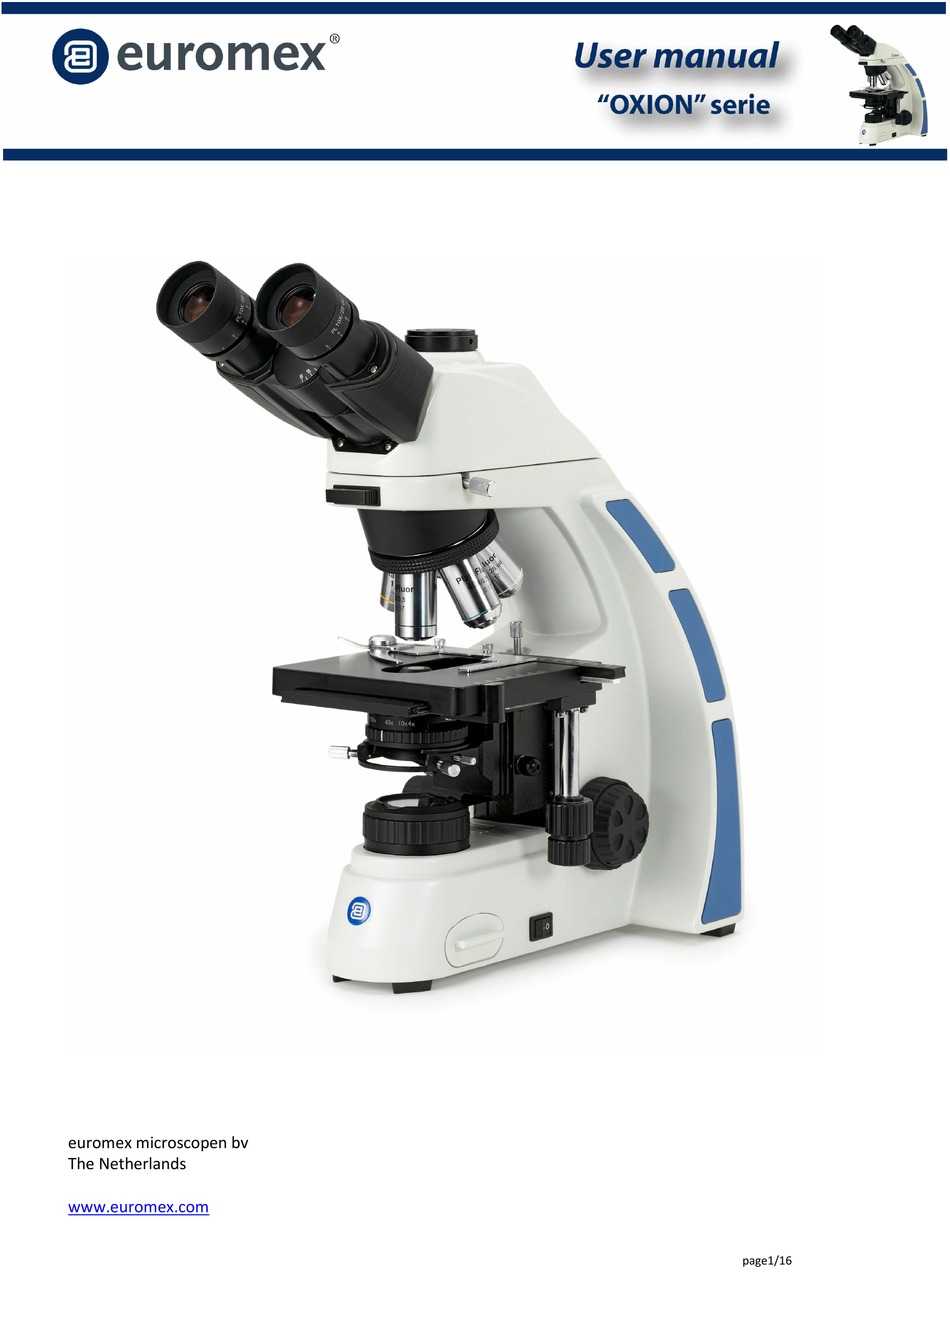 Download euromex microscope bv drivers